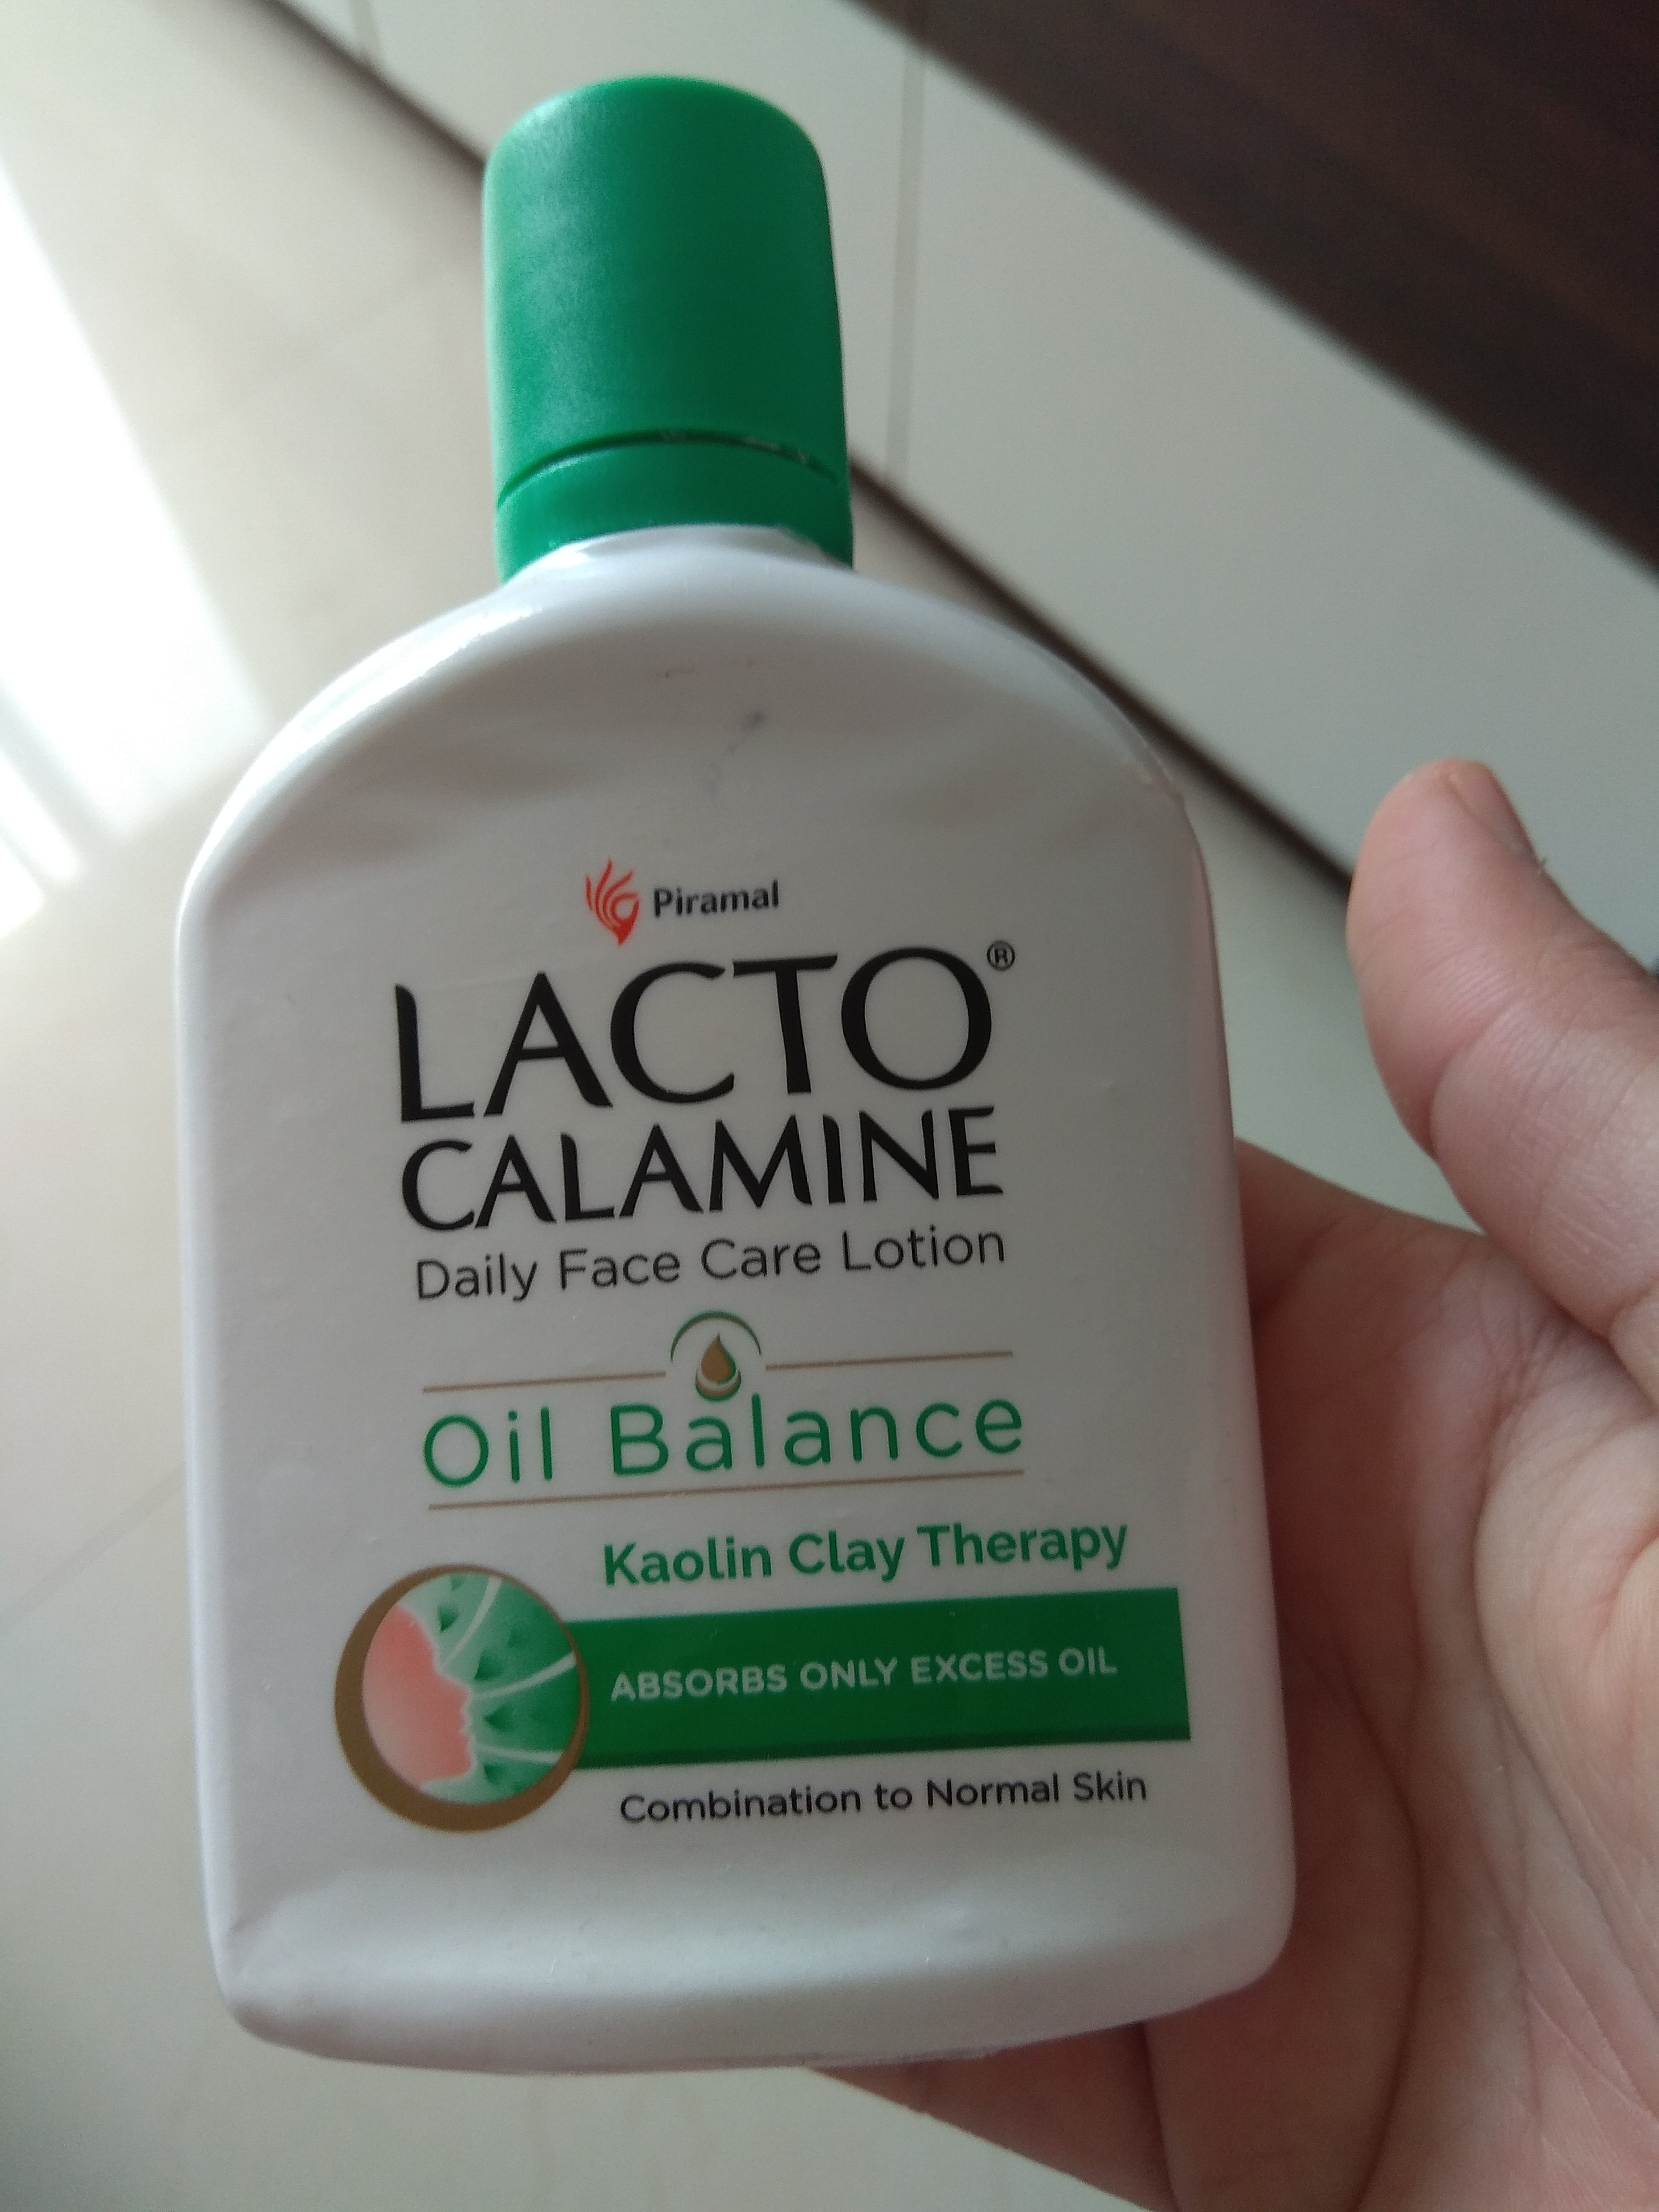 Lacto Calamine Oil Balance Lotion (For Oily Skin) Genuine Reviews From Users